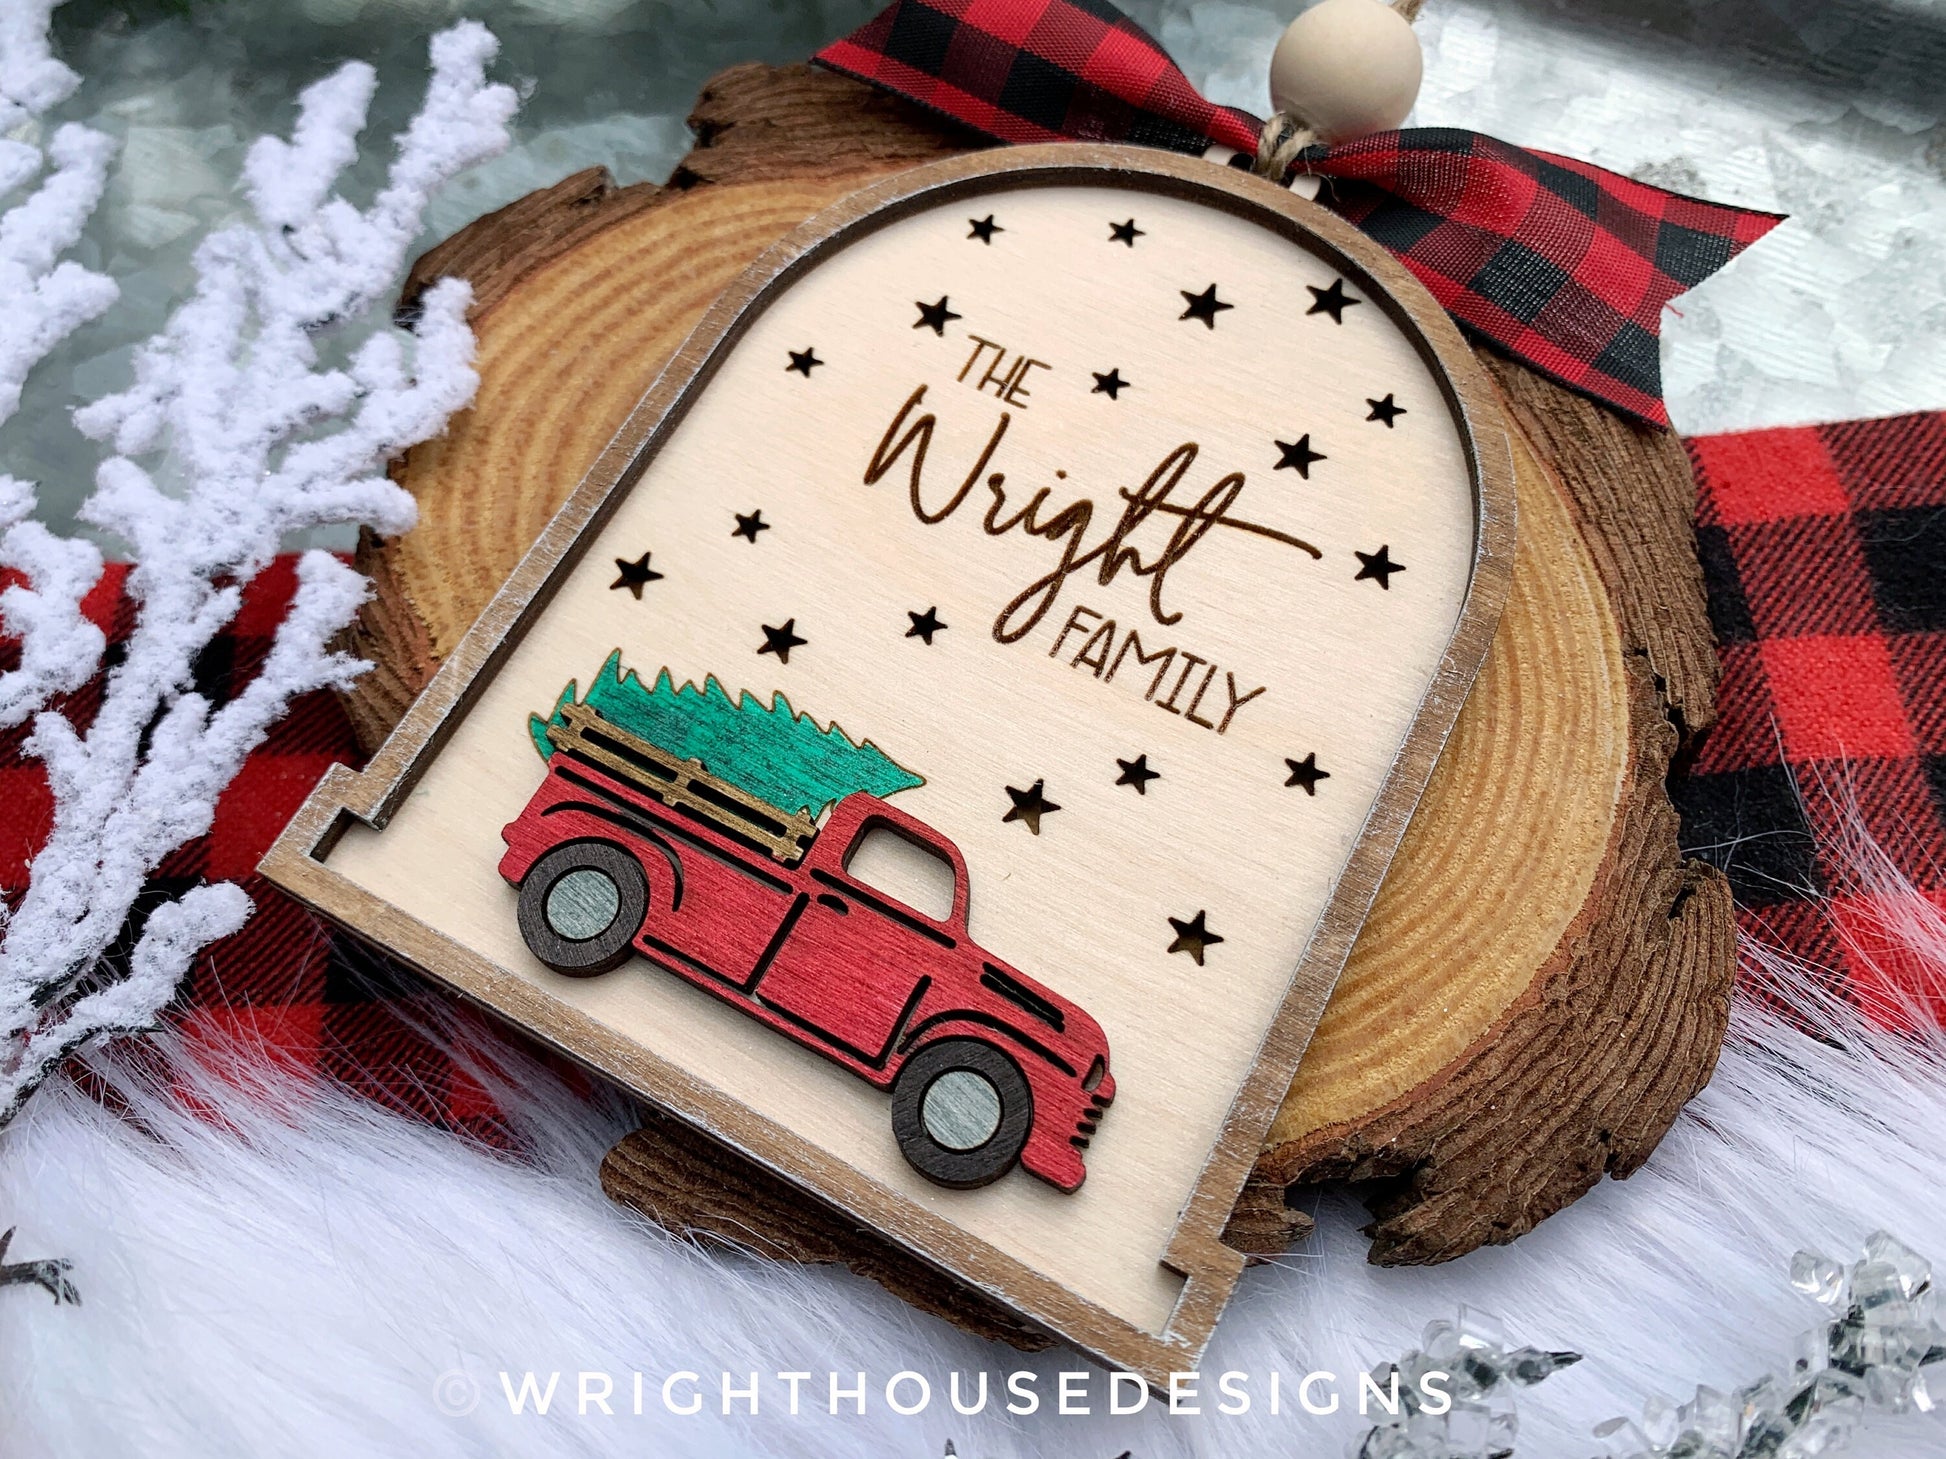 Rustic Farmhouse Family Name Ornament - Personalized Red Truck Ornament - Christmas Keepsake - Holiday Gift for Couples - Lightcatcher